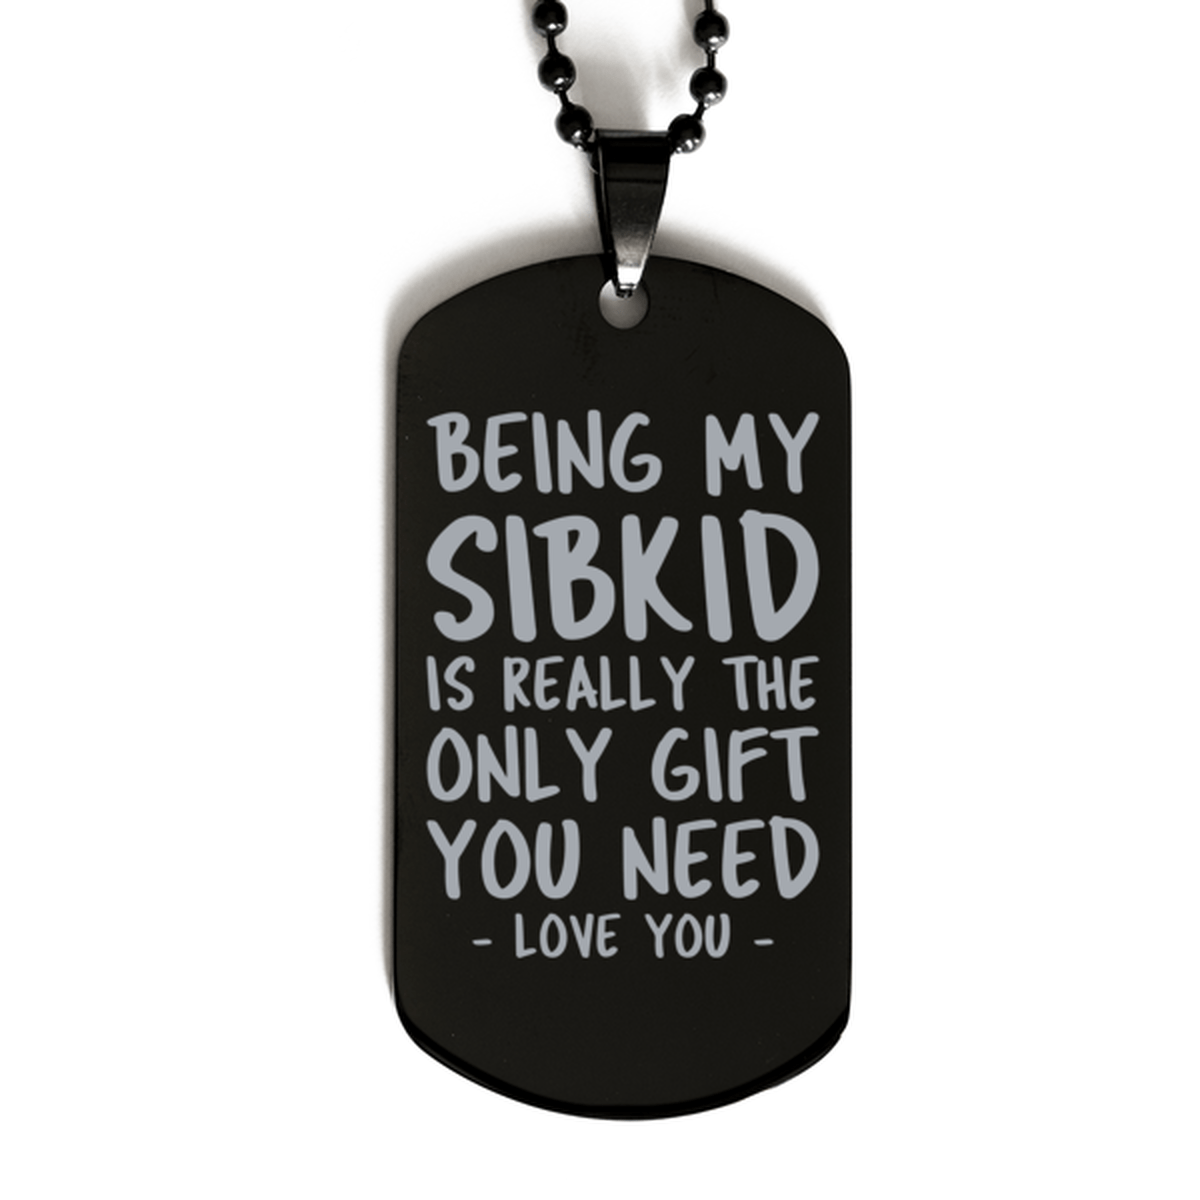 Funny Sibkid Black Dog Tag Necklace, Being My Sibkid Is Really the Only Gift You Need, Best Birthday Gifts for Sibkid